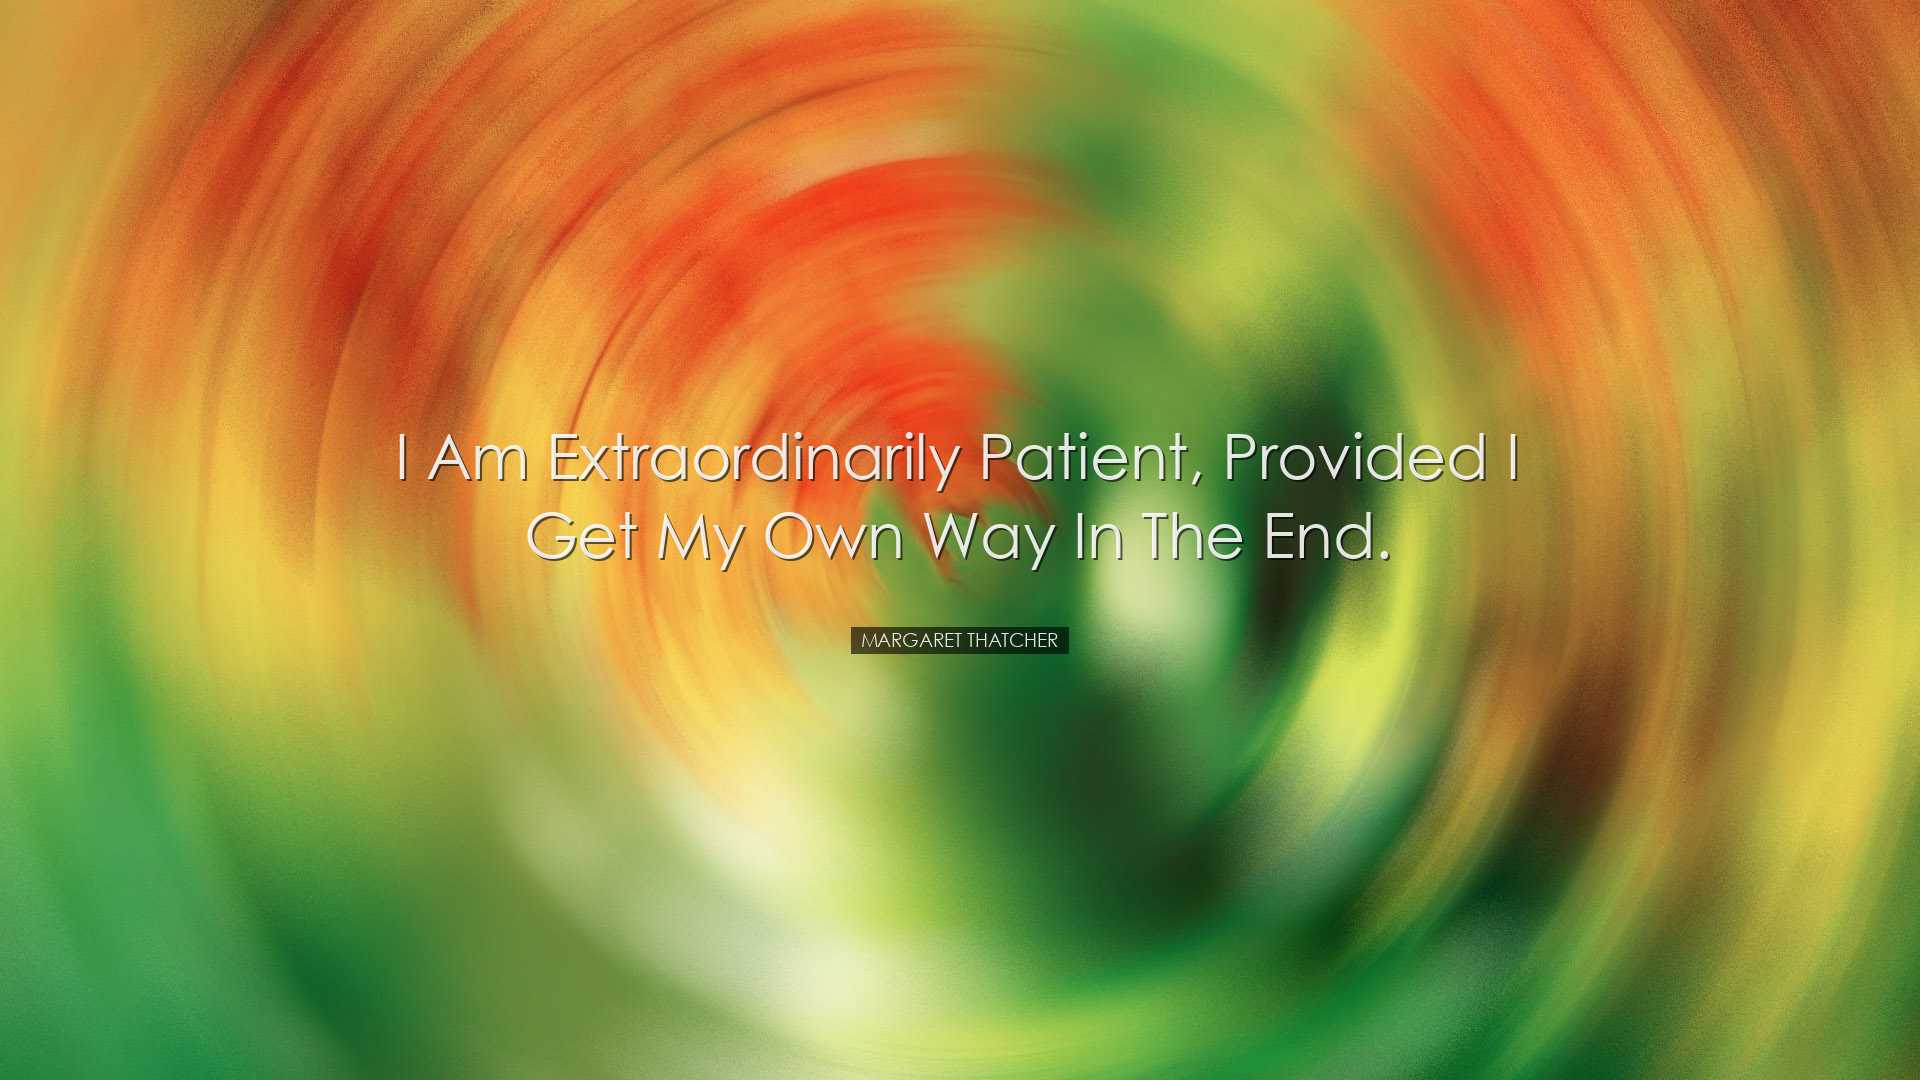 I am extraordinarily patient, provided I get my own way in the end